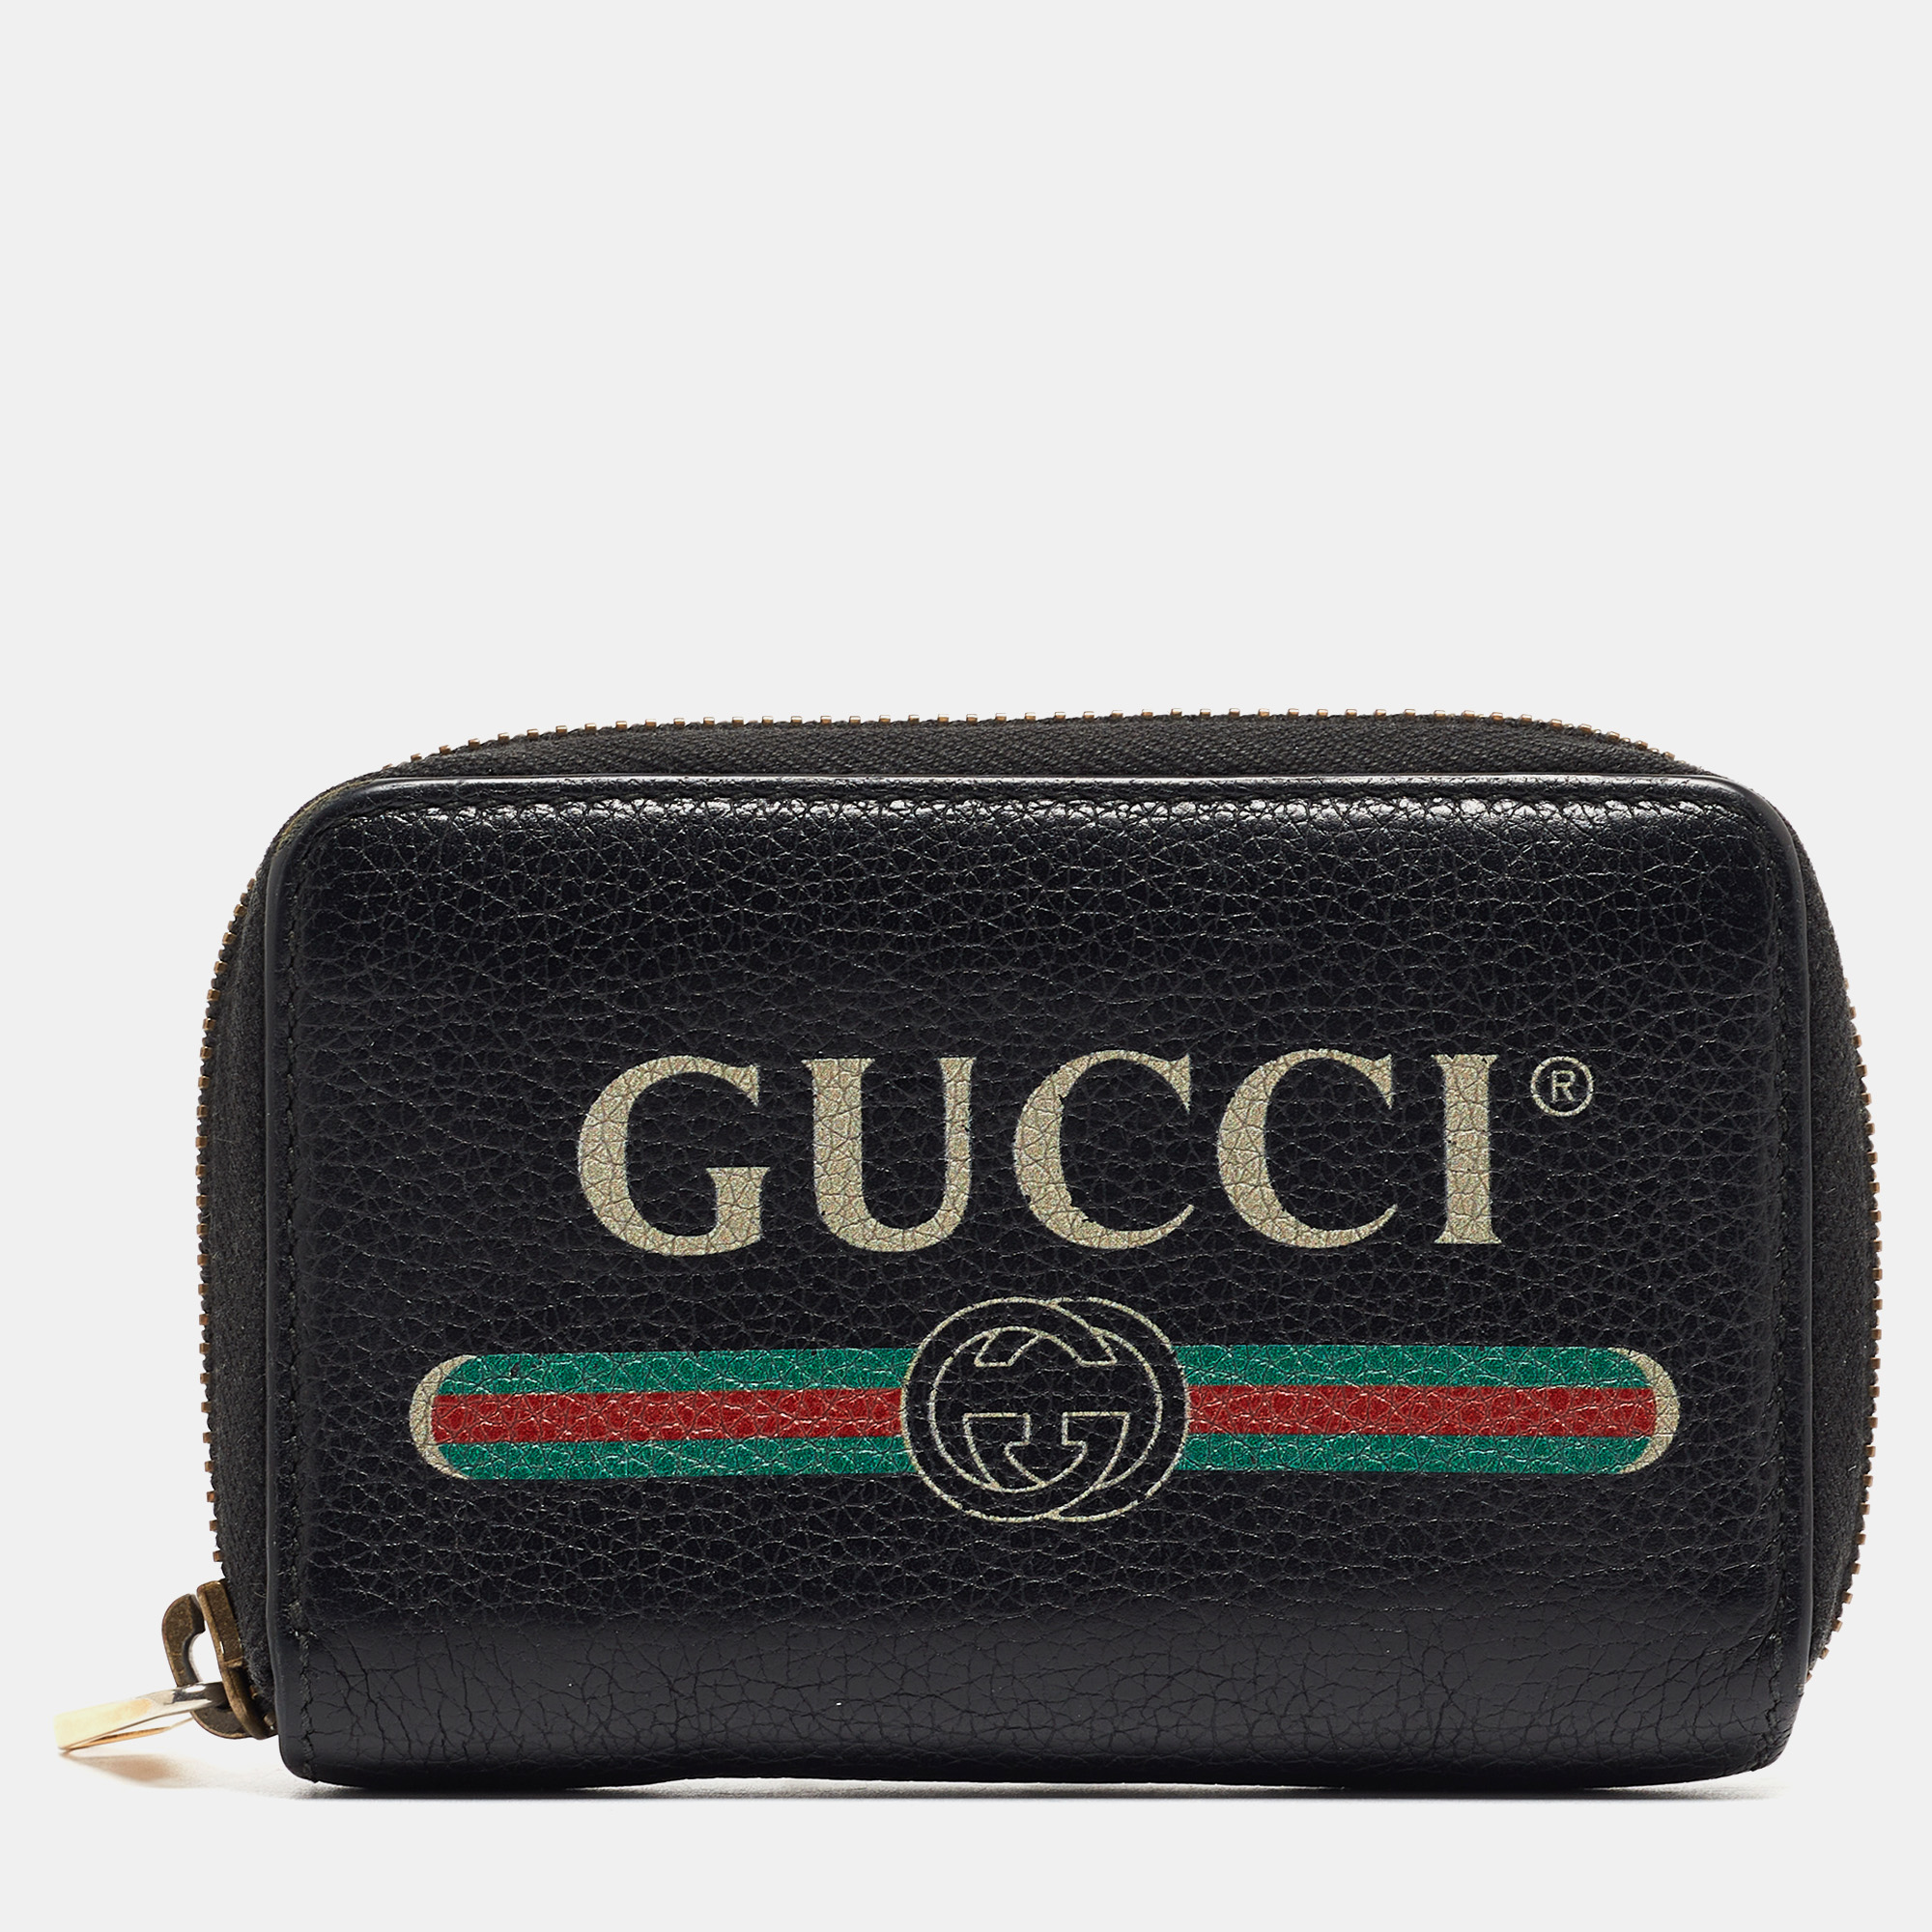 Pre-owned Gucci Black Leather Logo Zip Purse